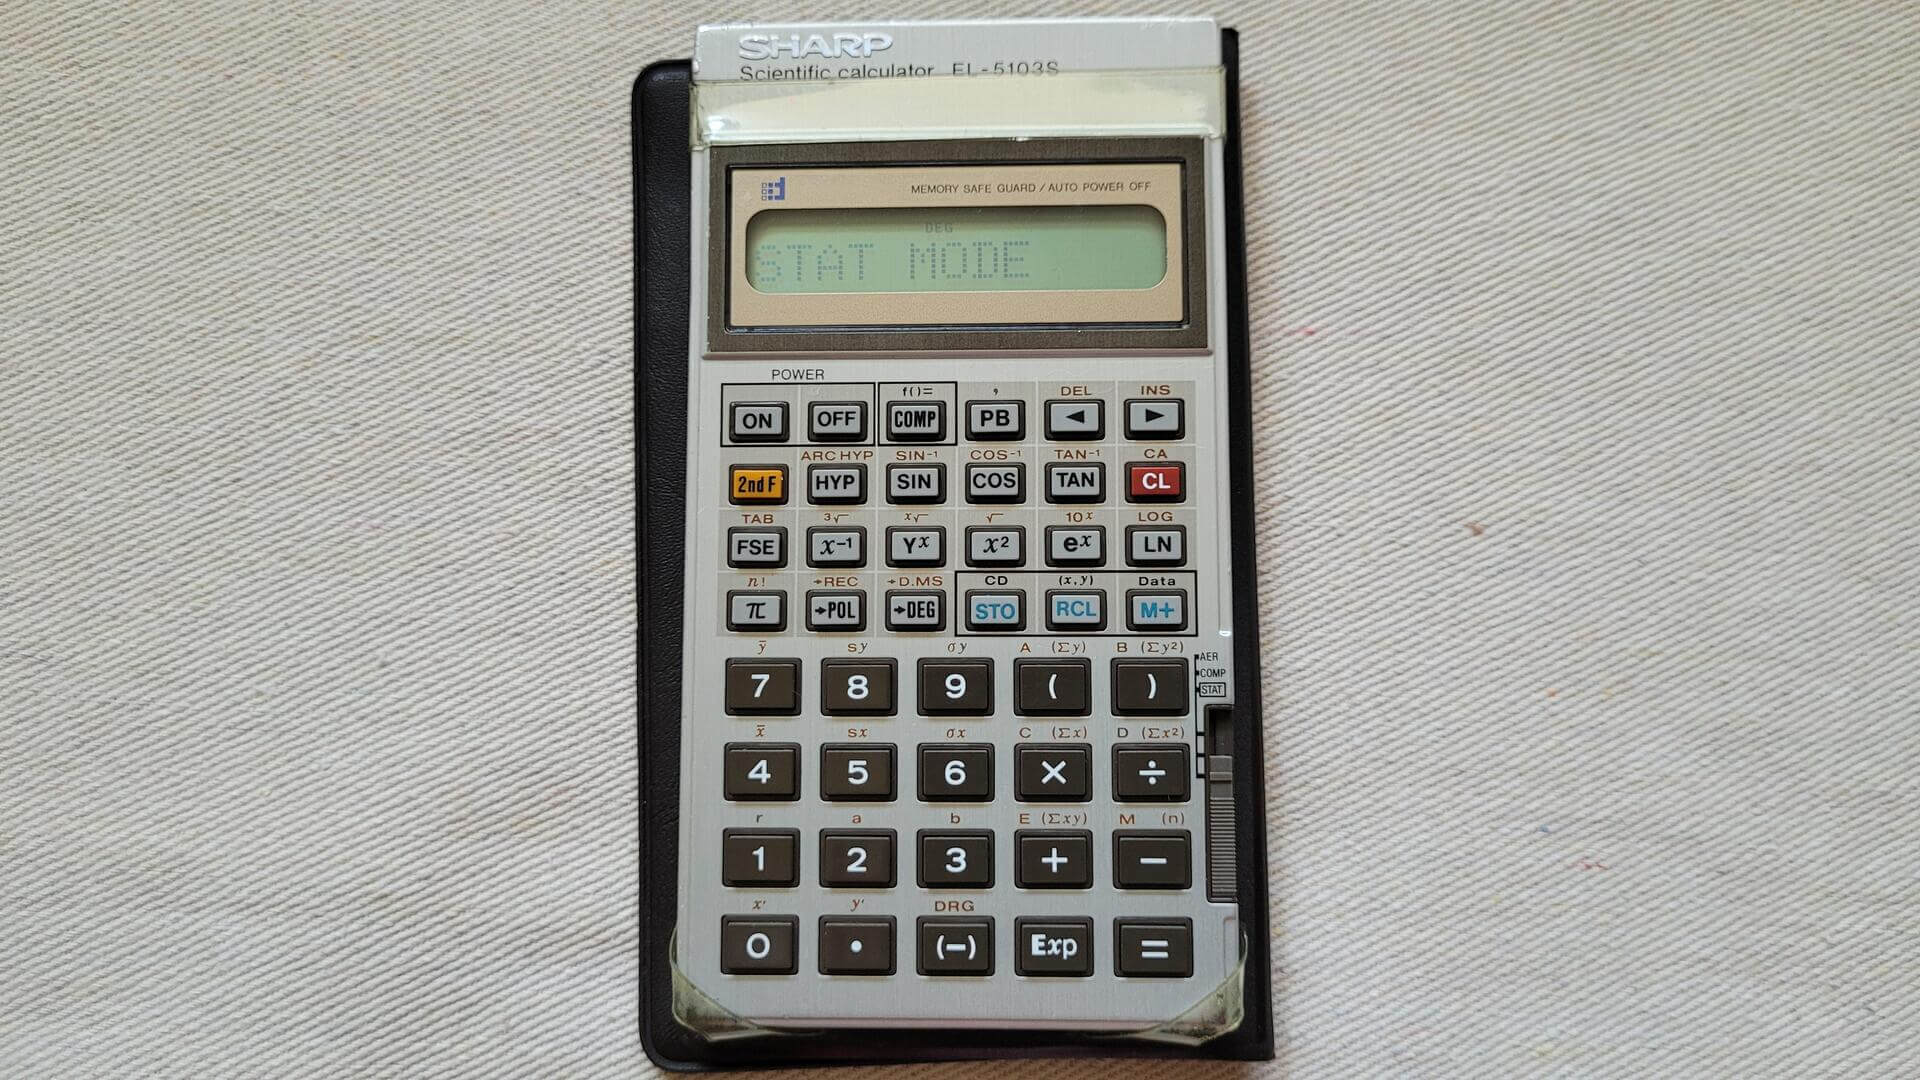 sharp-el-5103s-programmable-calculator-12-digits-44-keys-lcd-display-rare-vintage-1970s-made-in-japan-collectible